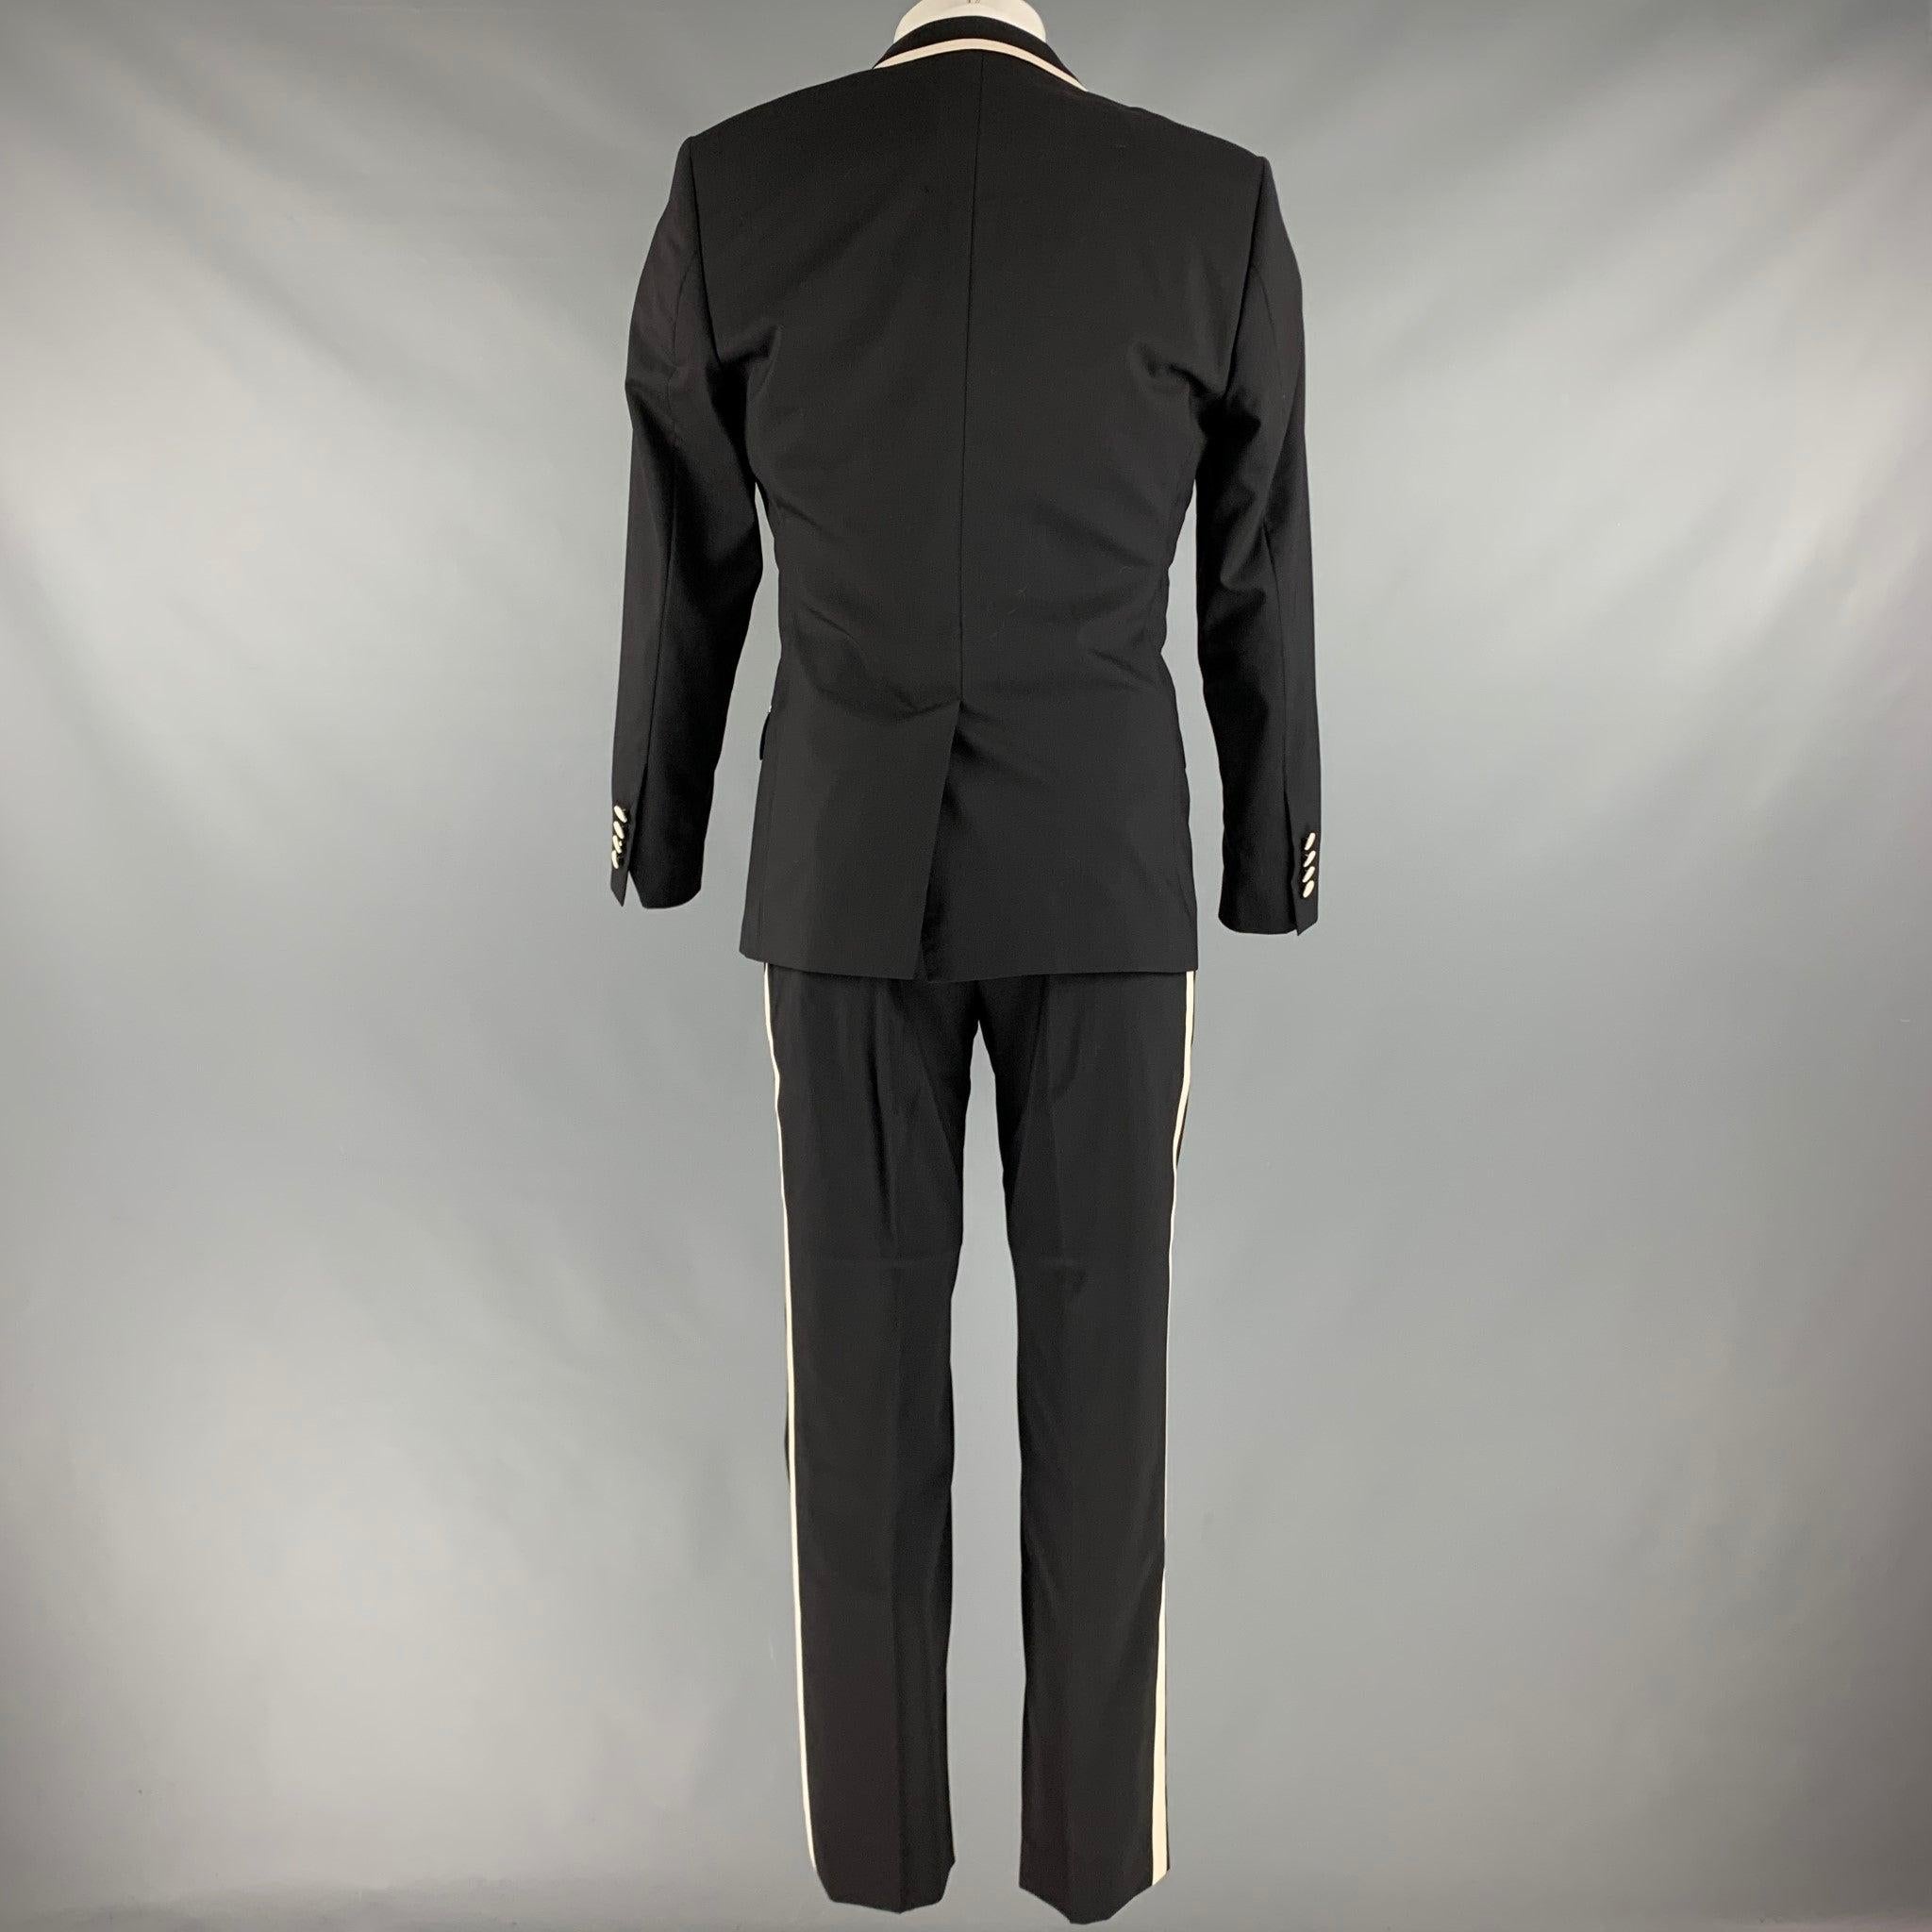 DOLCE & GABBANA Chest Size 38 Black White Solid Wool Blend Peak Lapel Suit In Good Condition For Sale In San Francisco, CA